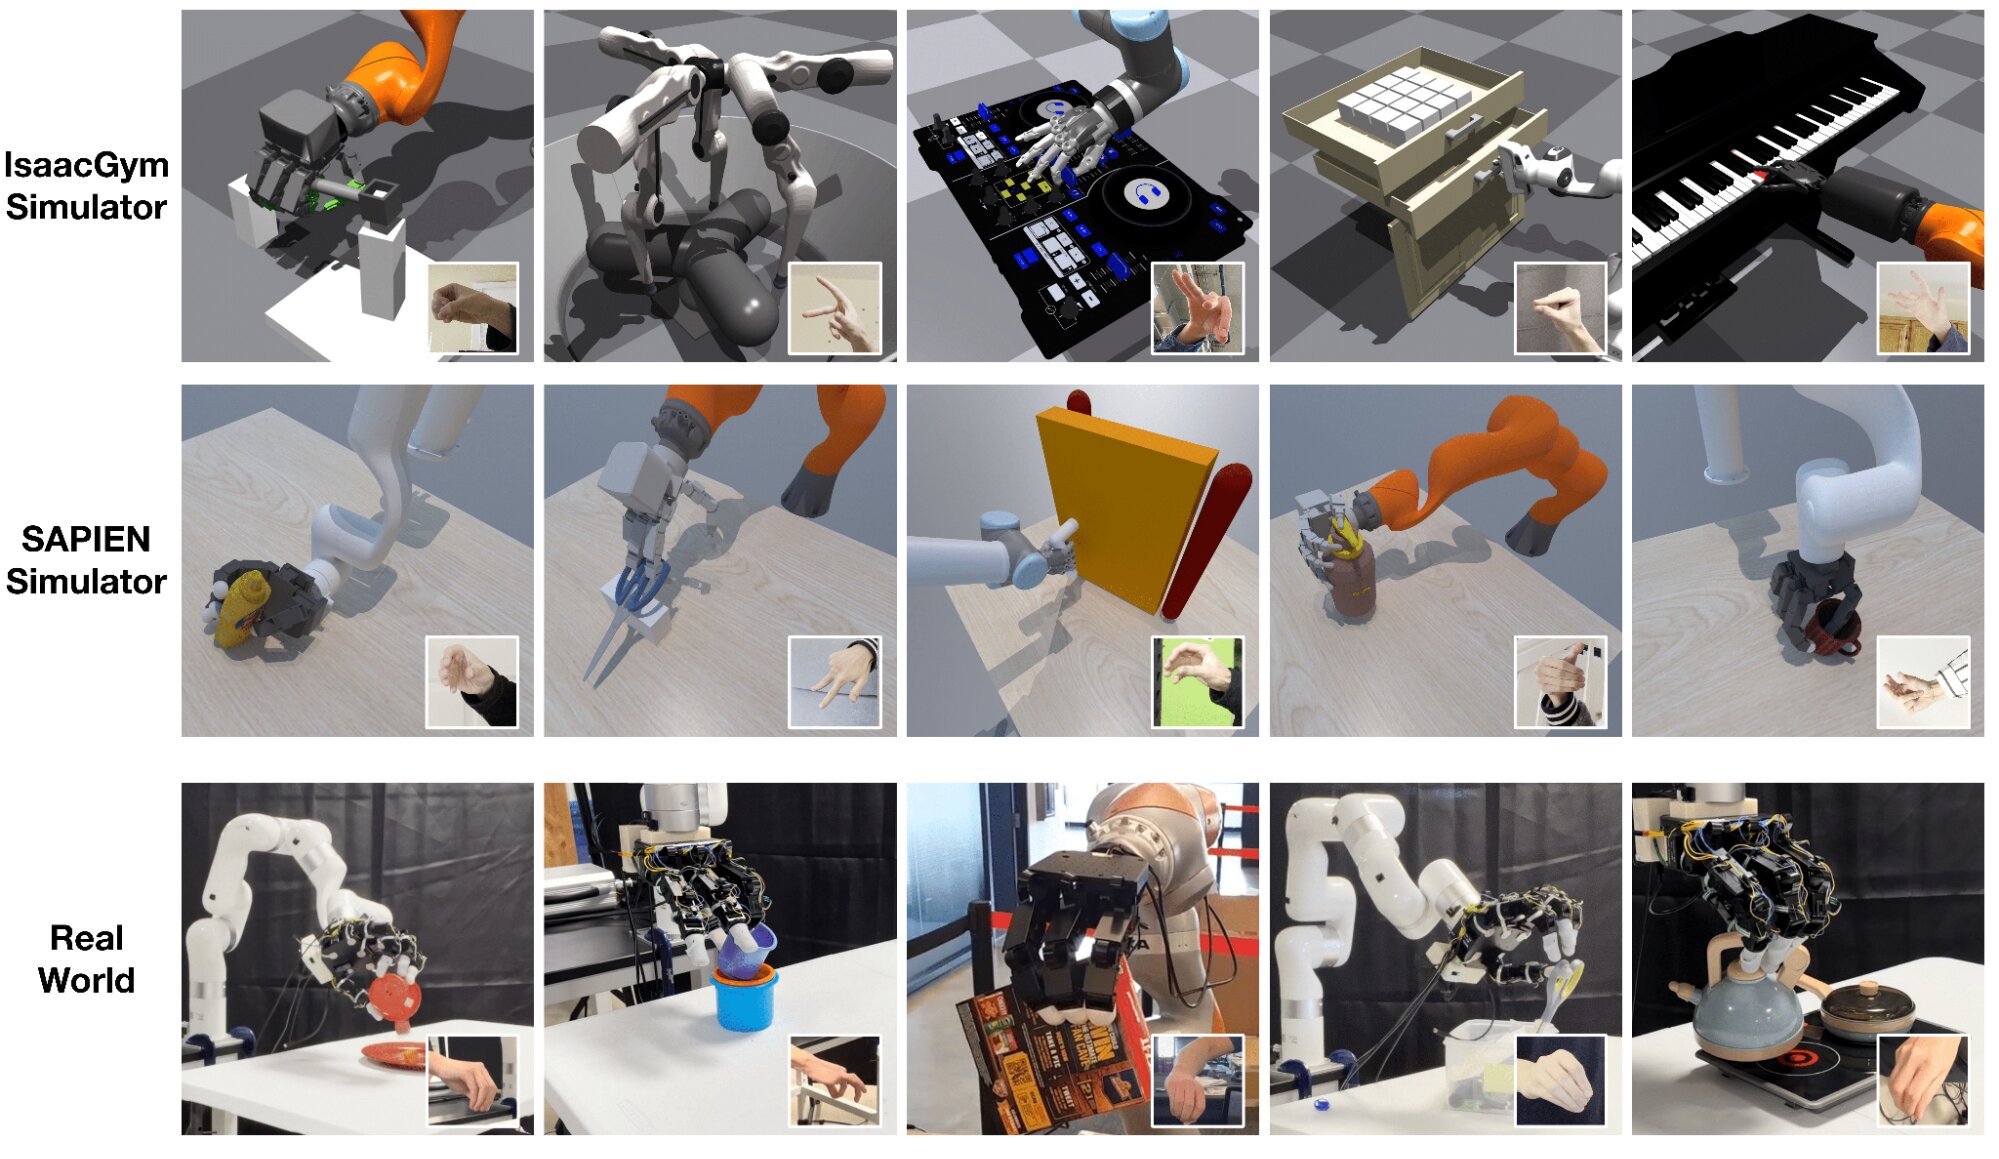 A computer vision–based teleoperation system that can be applied to different robots